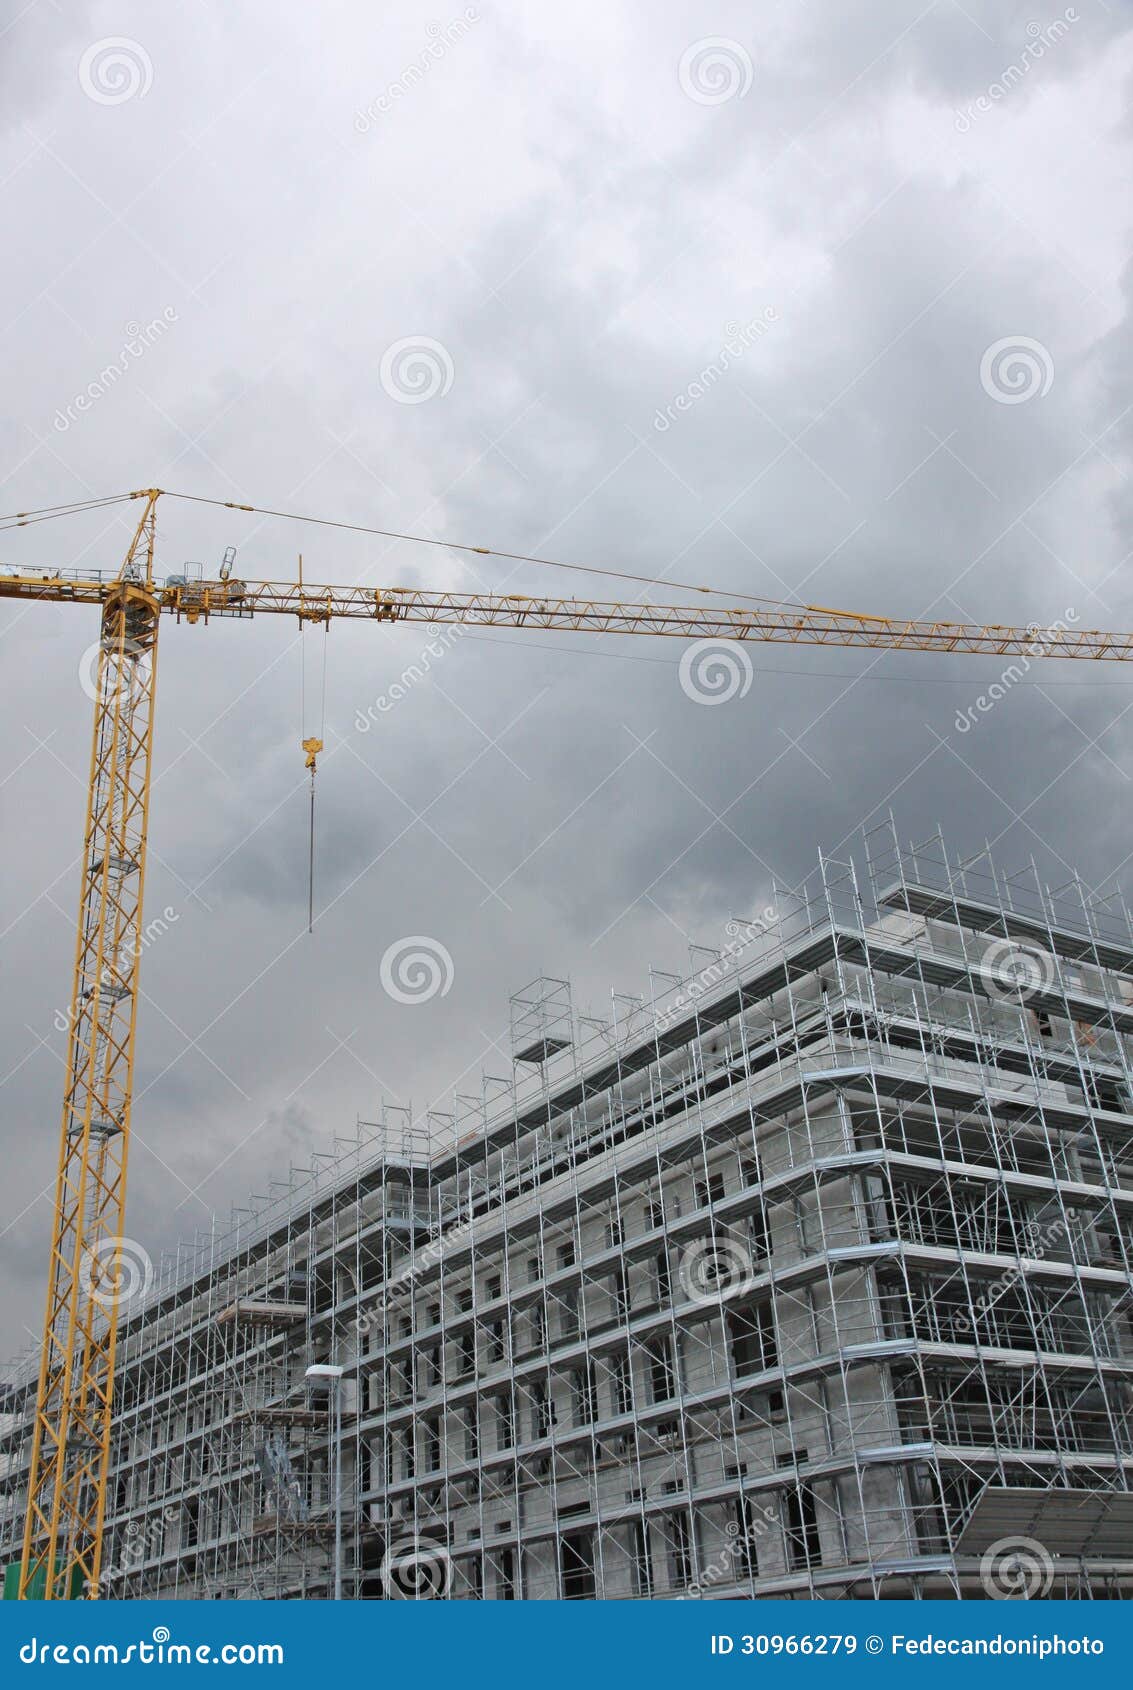 structure of a skyscraper under construction with the lead